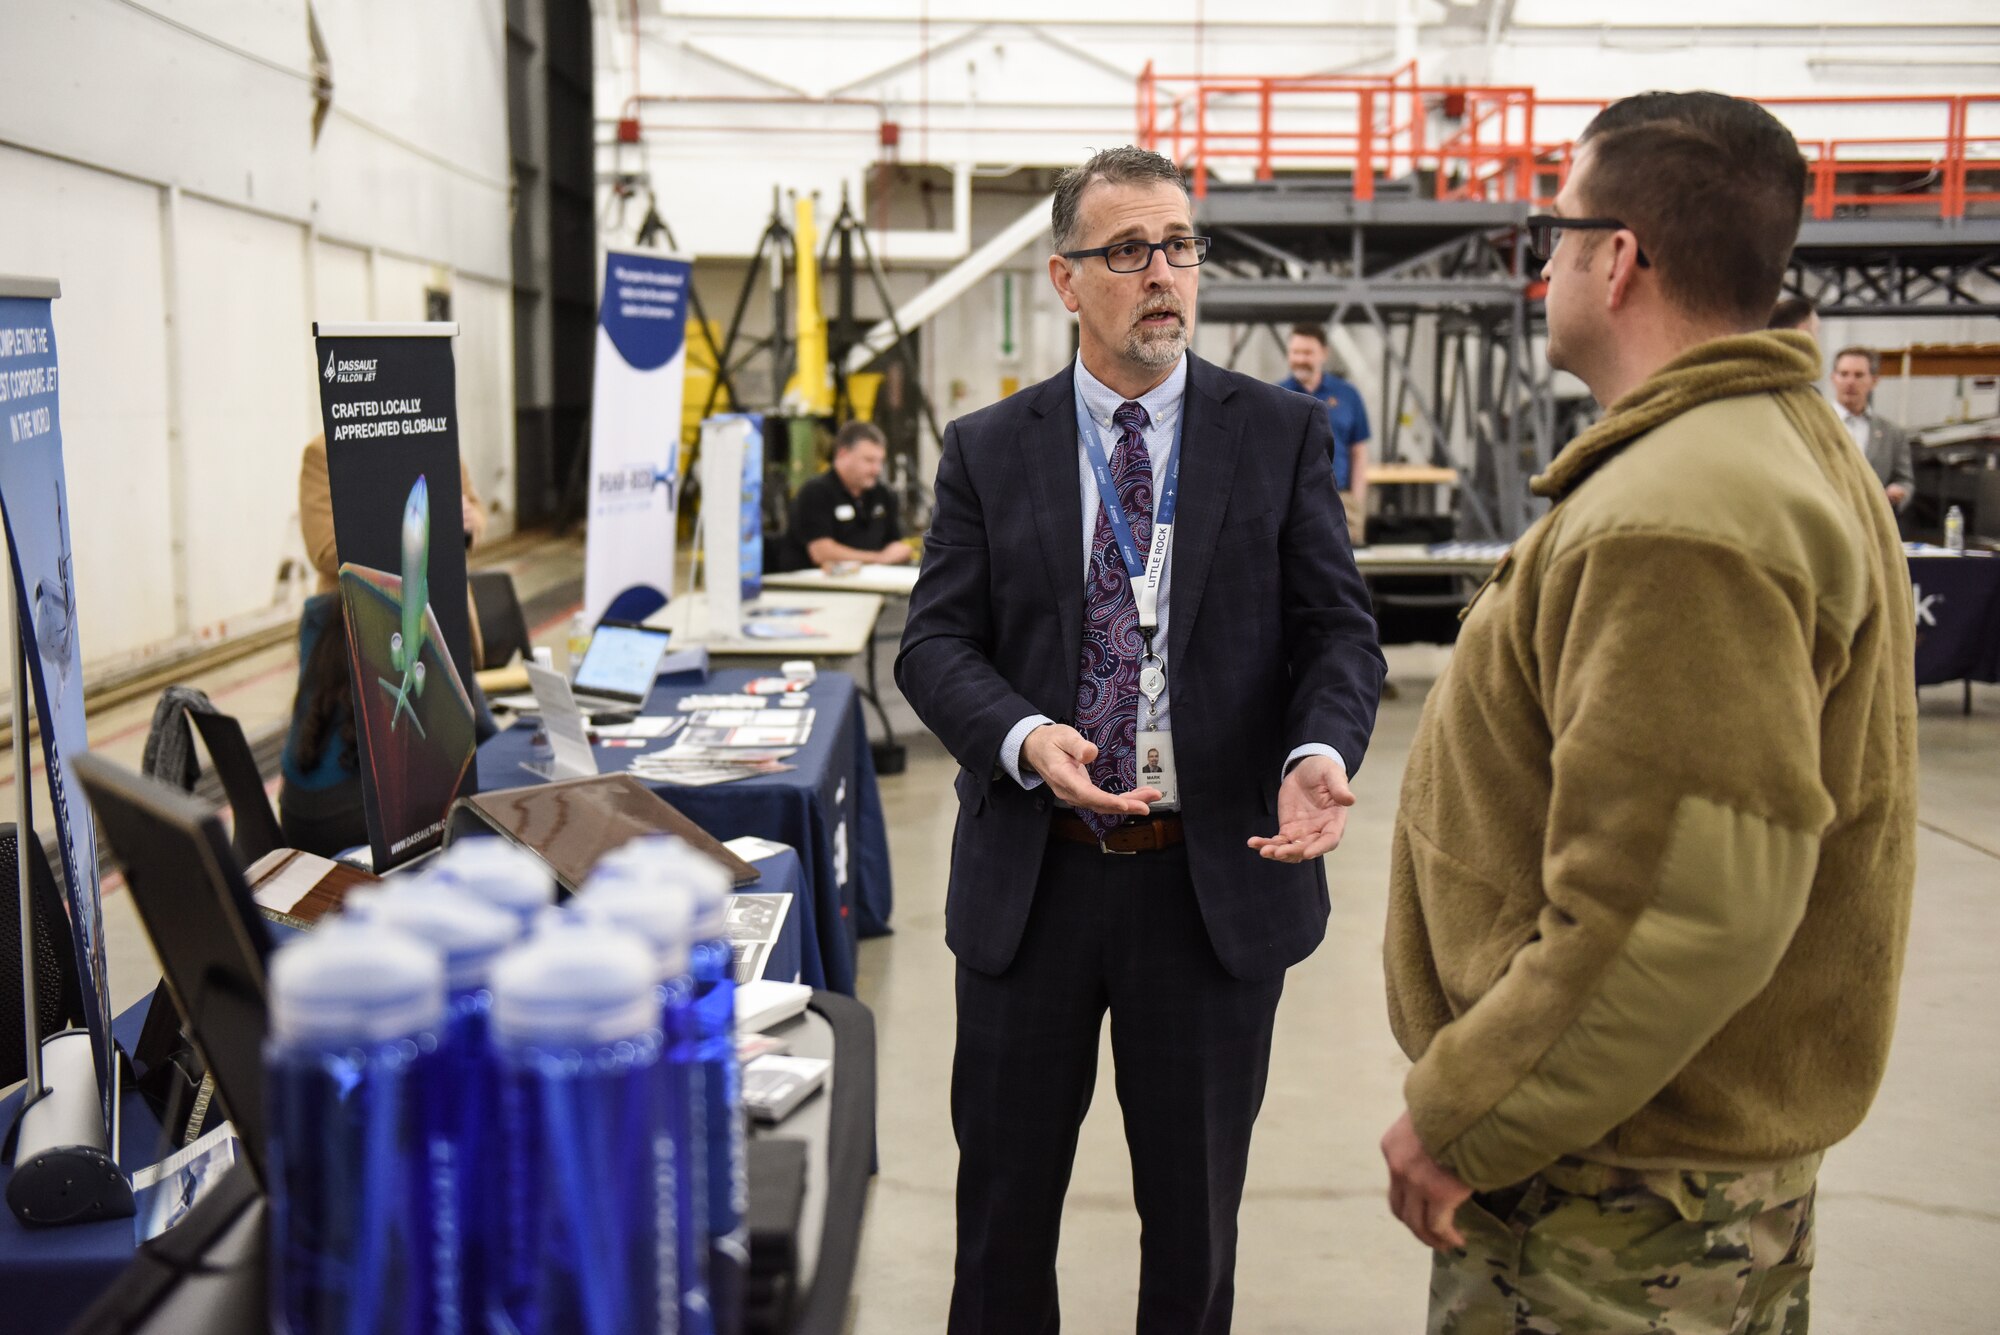 Community and Guardsmen build aviation and defense workforce